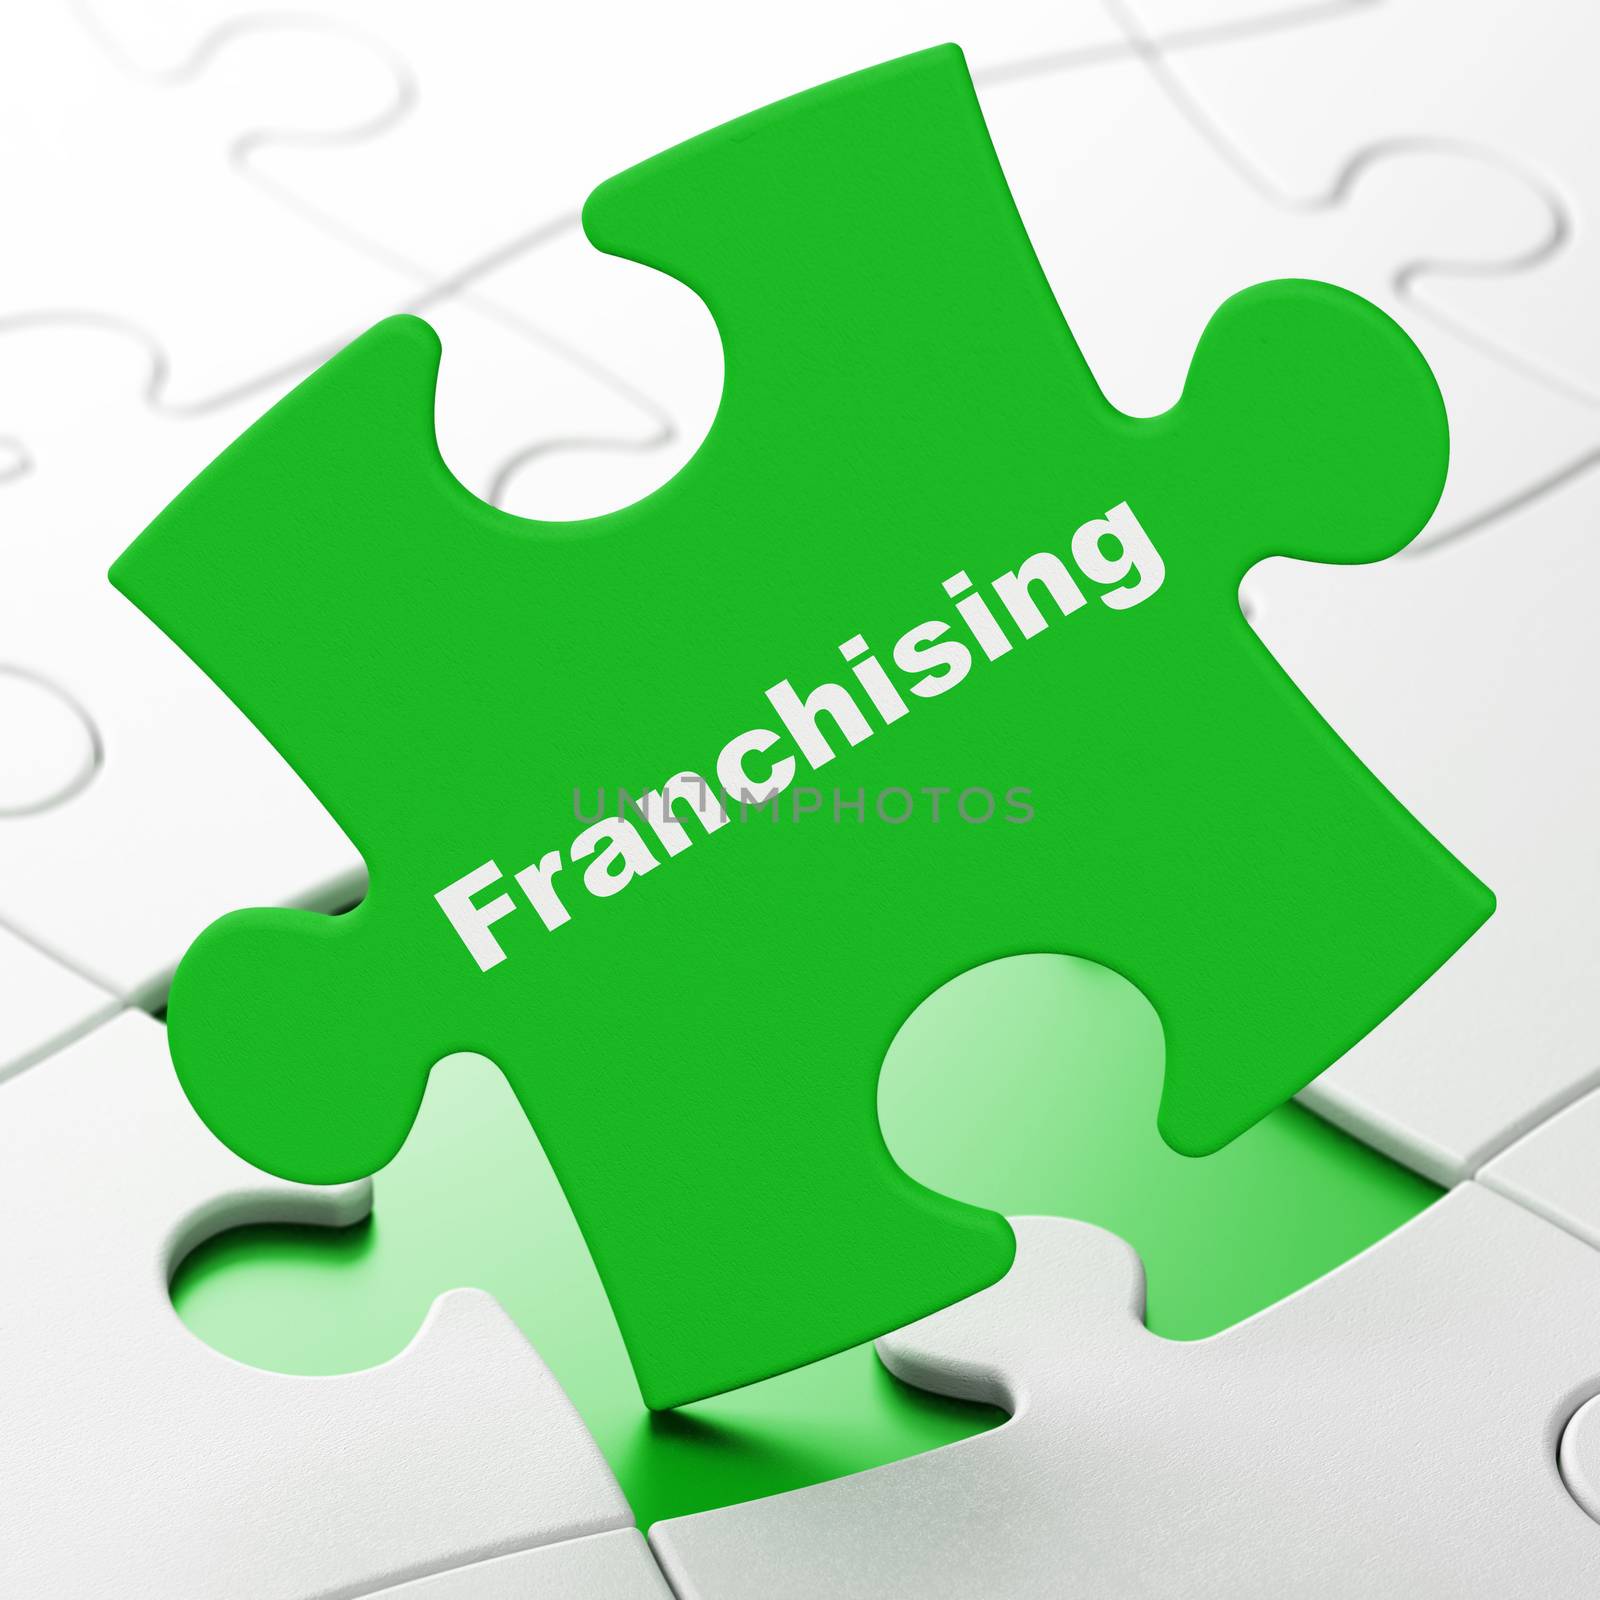 Business concept: Franchising on Green puzzle pieces background, 3d render